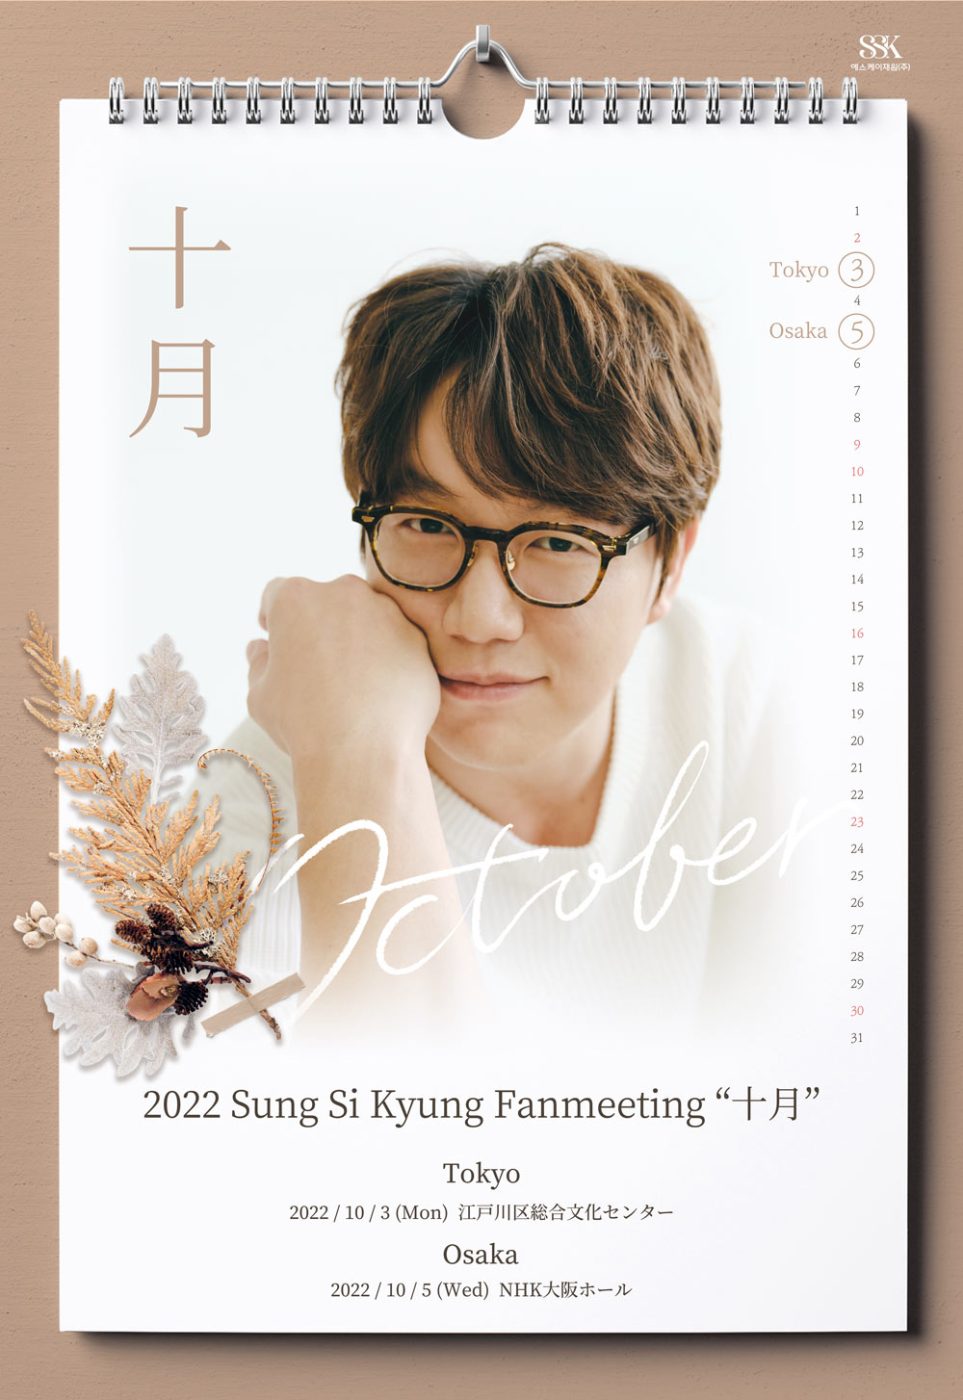 2022 Sung Si Kyung Fanmeeting “十月”